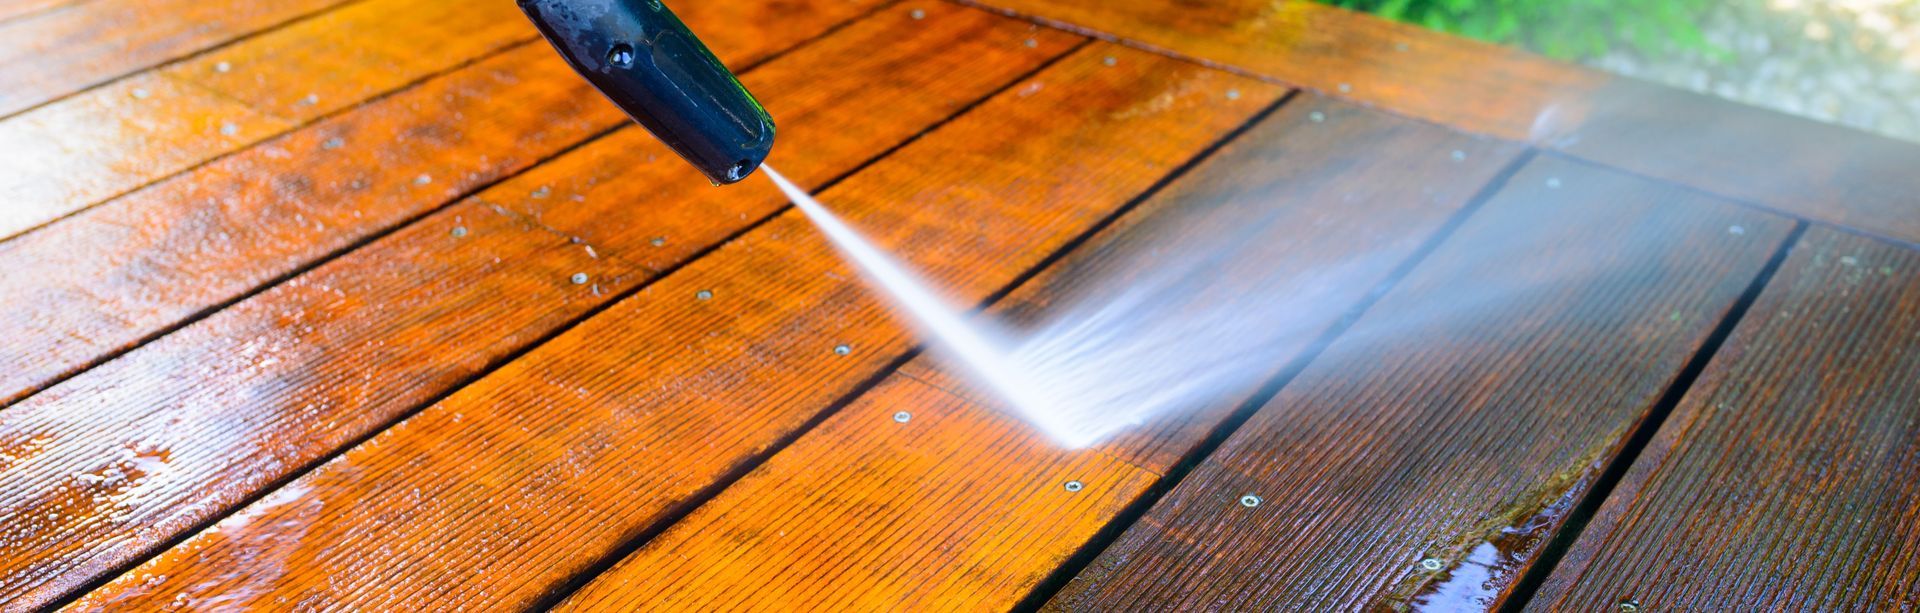 Decking cleaning service removing algae and dirt by pressure washing